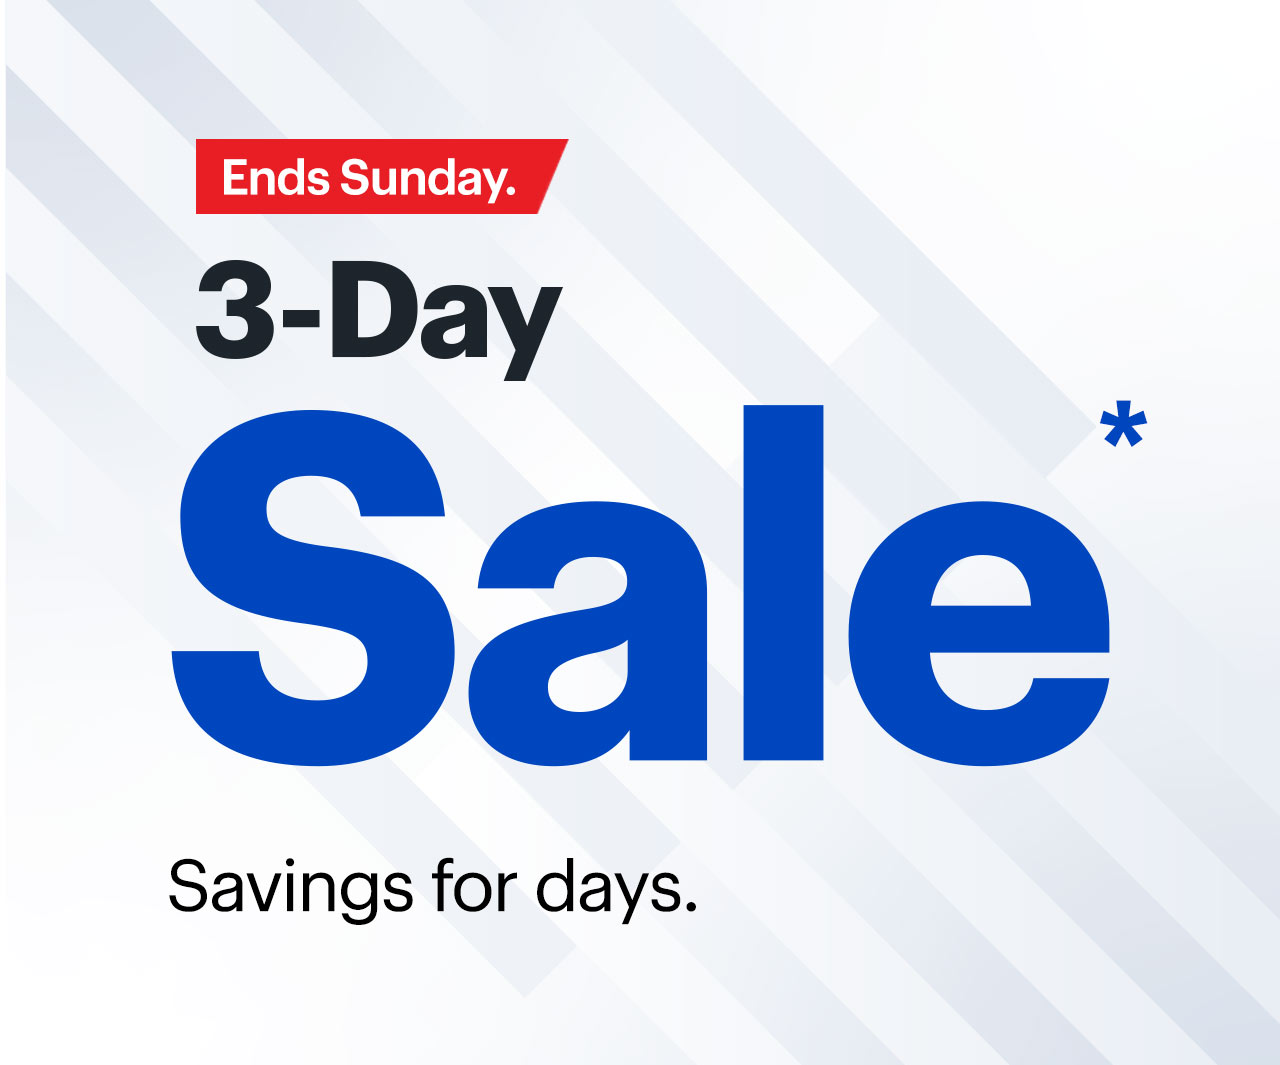 3-Day Sale Ends Sunday. Savings for days. Reference disclaimer. 3-Day Sale Savings for days. 